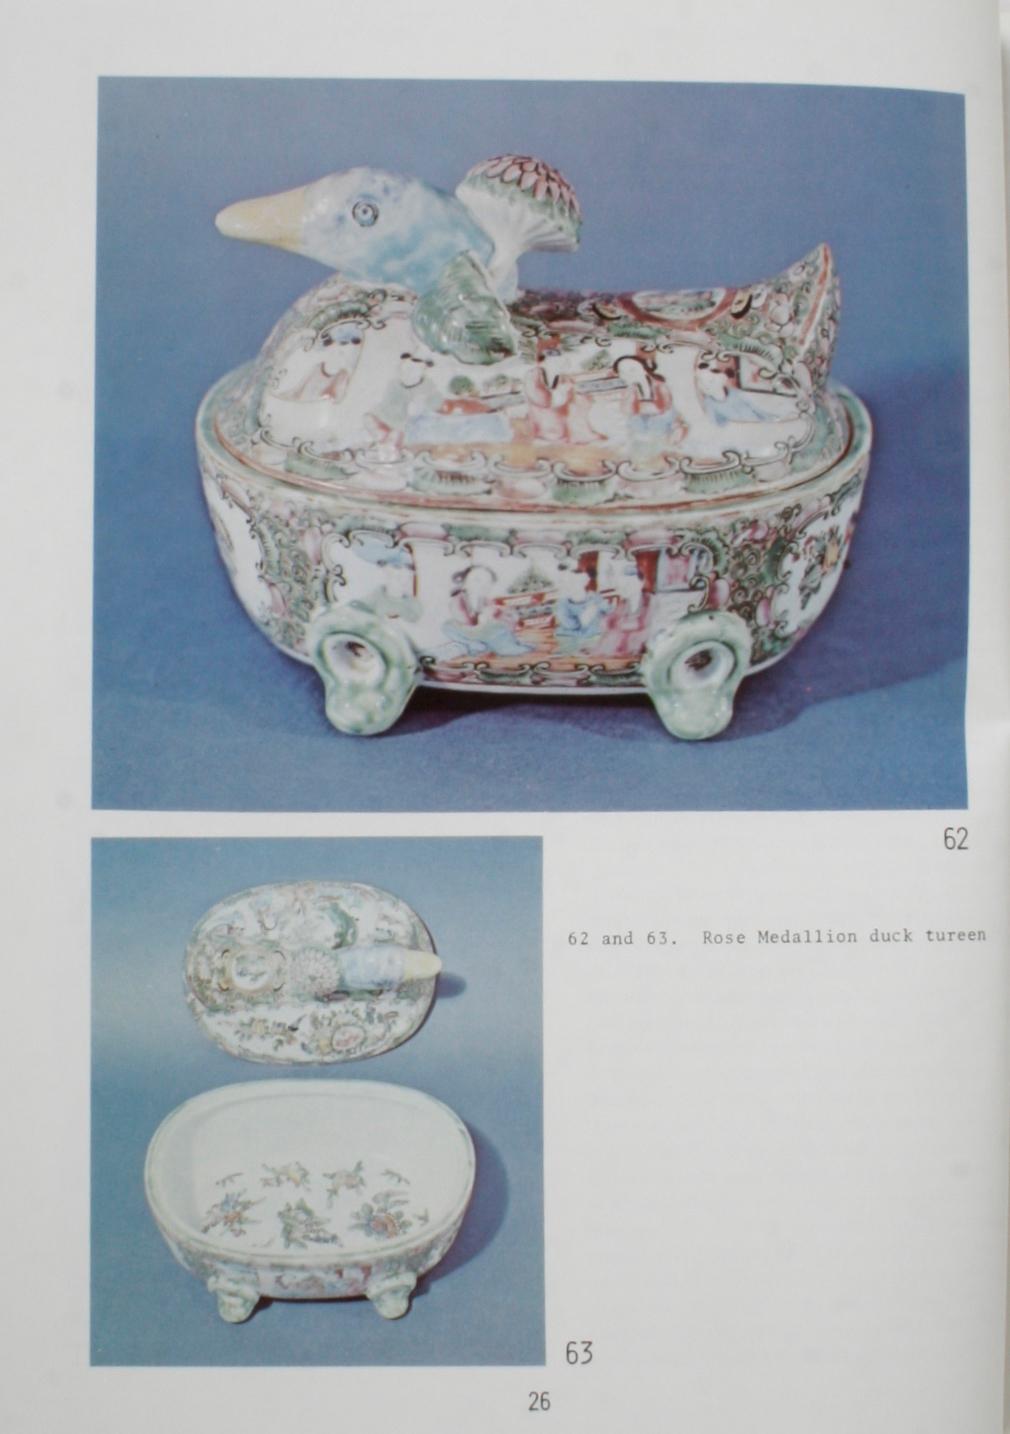 Chinese Export Porcelain, Standard Patterns and Forms, 1780-1880, First Edition For Sale 8